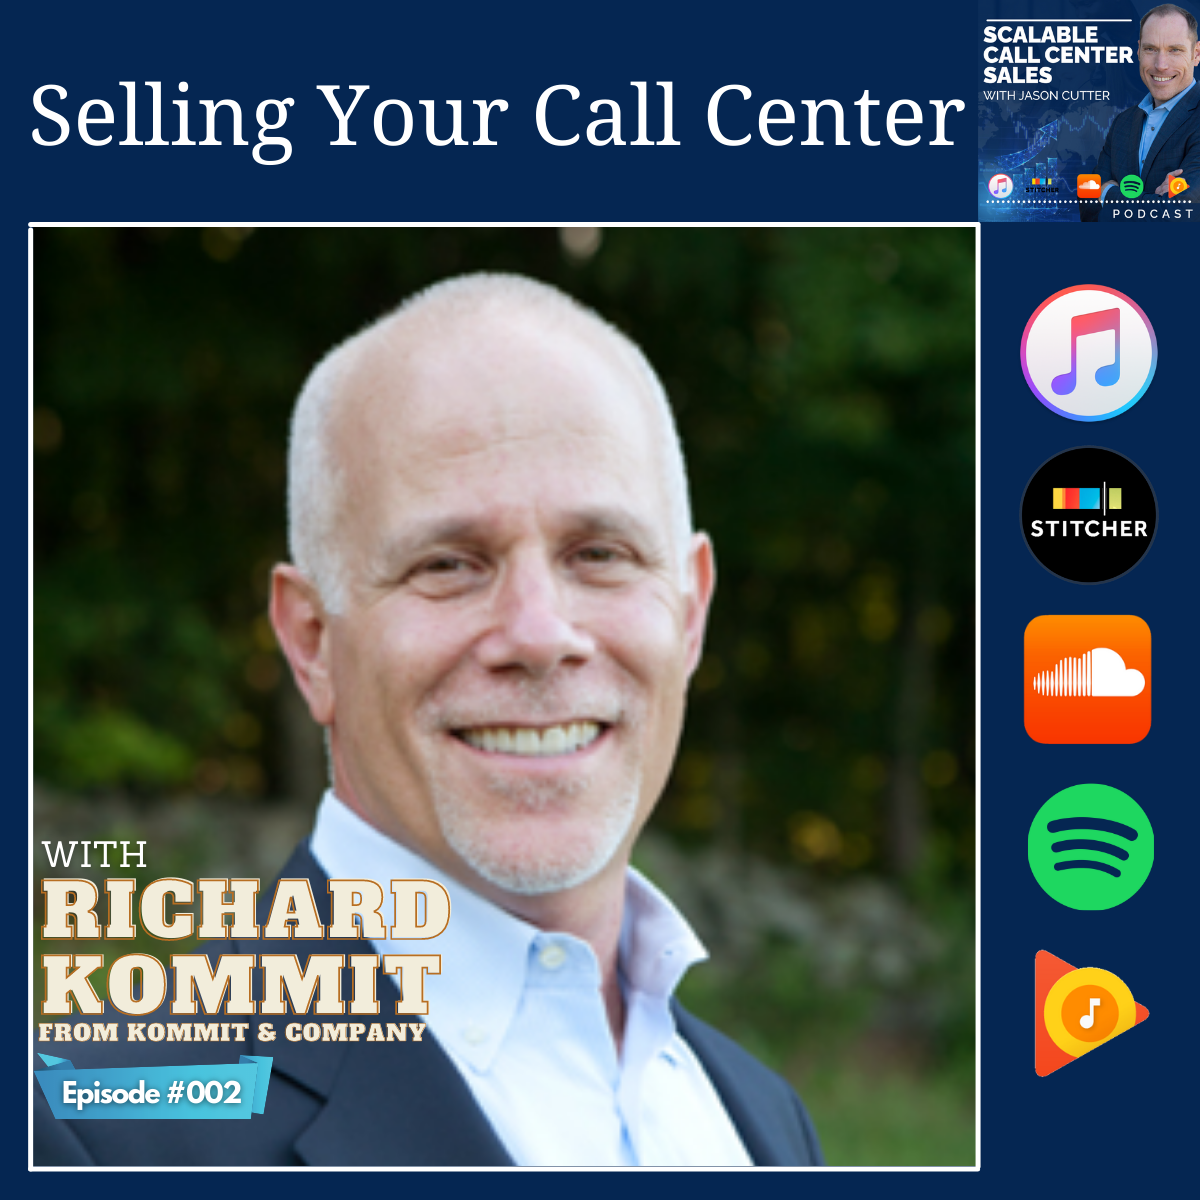 [002] Selling Your Call Center, with Richard Kommit